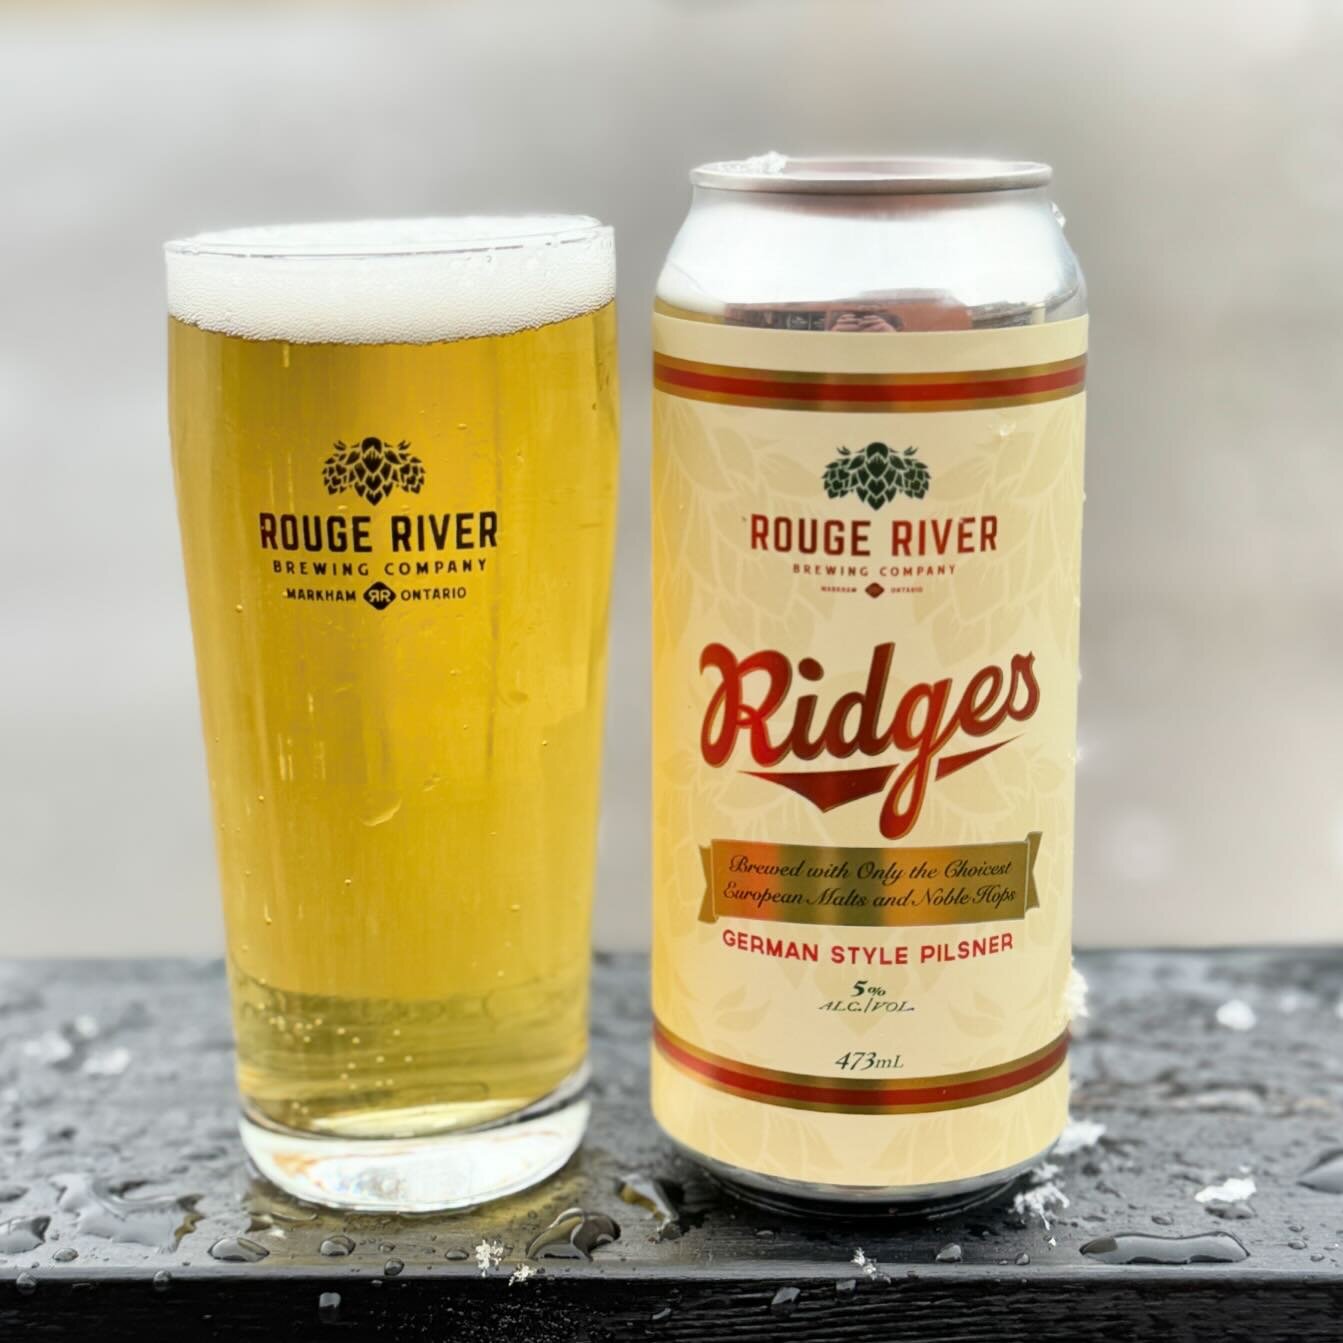 ❗️Release 1/5 this week is our Ridges Pilsner. Made with a special German-Imported malt and German Hallertau hops, we get a perfectly subtle grassy floral aroma with a rich bready malt character you can only get from the imported stuff. 

Available n